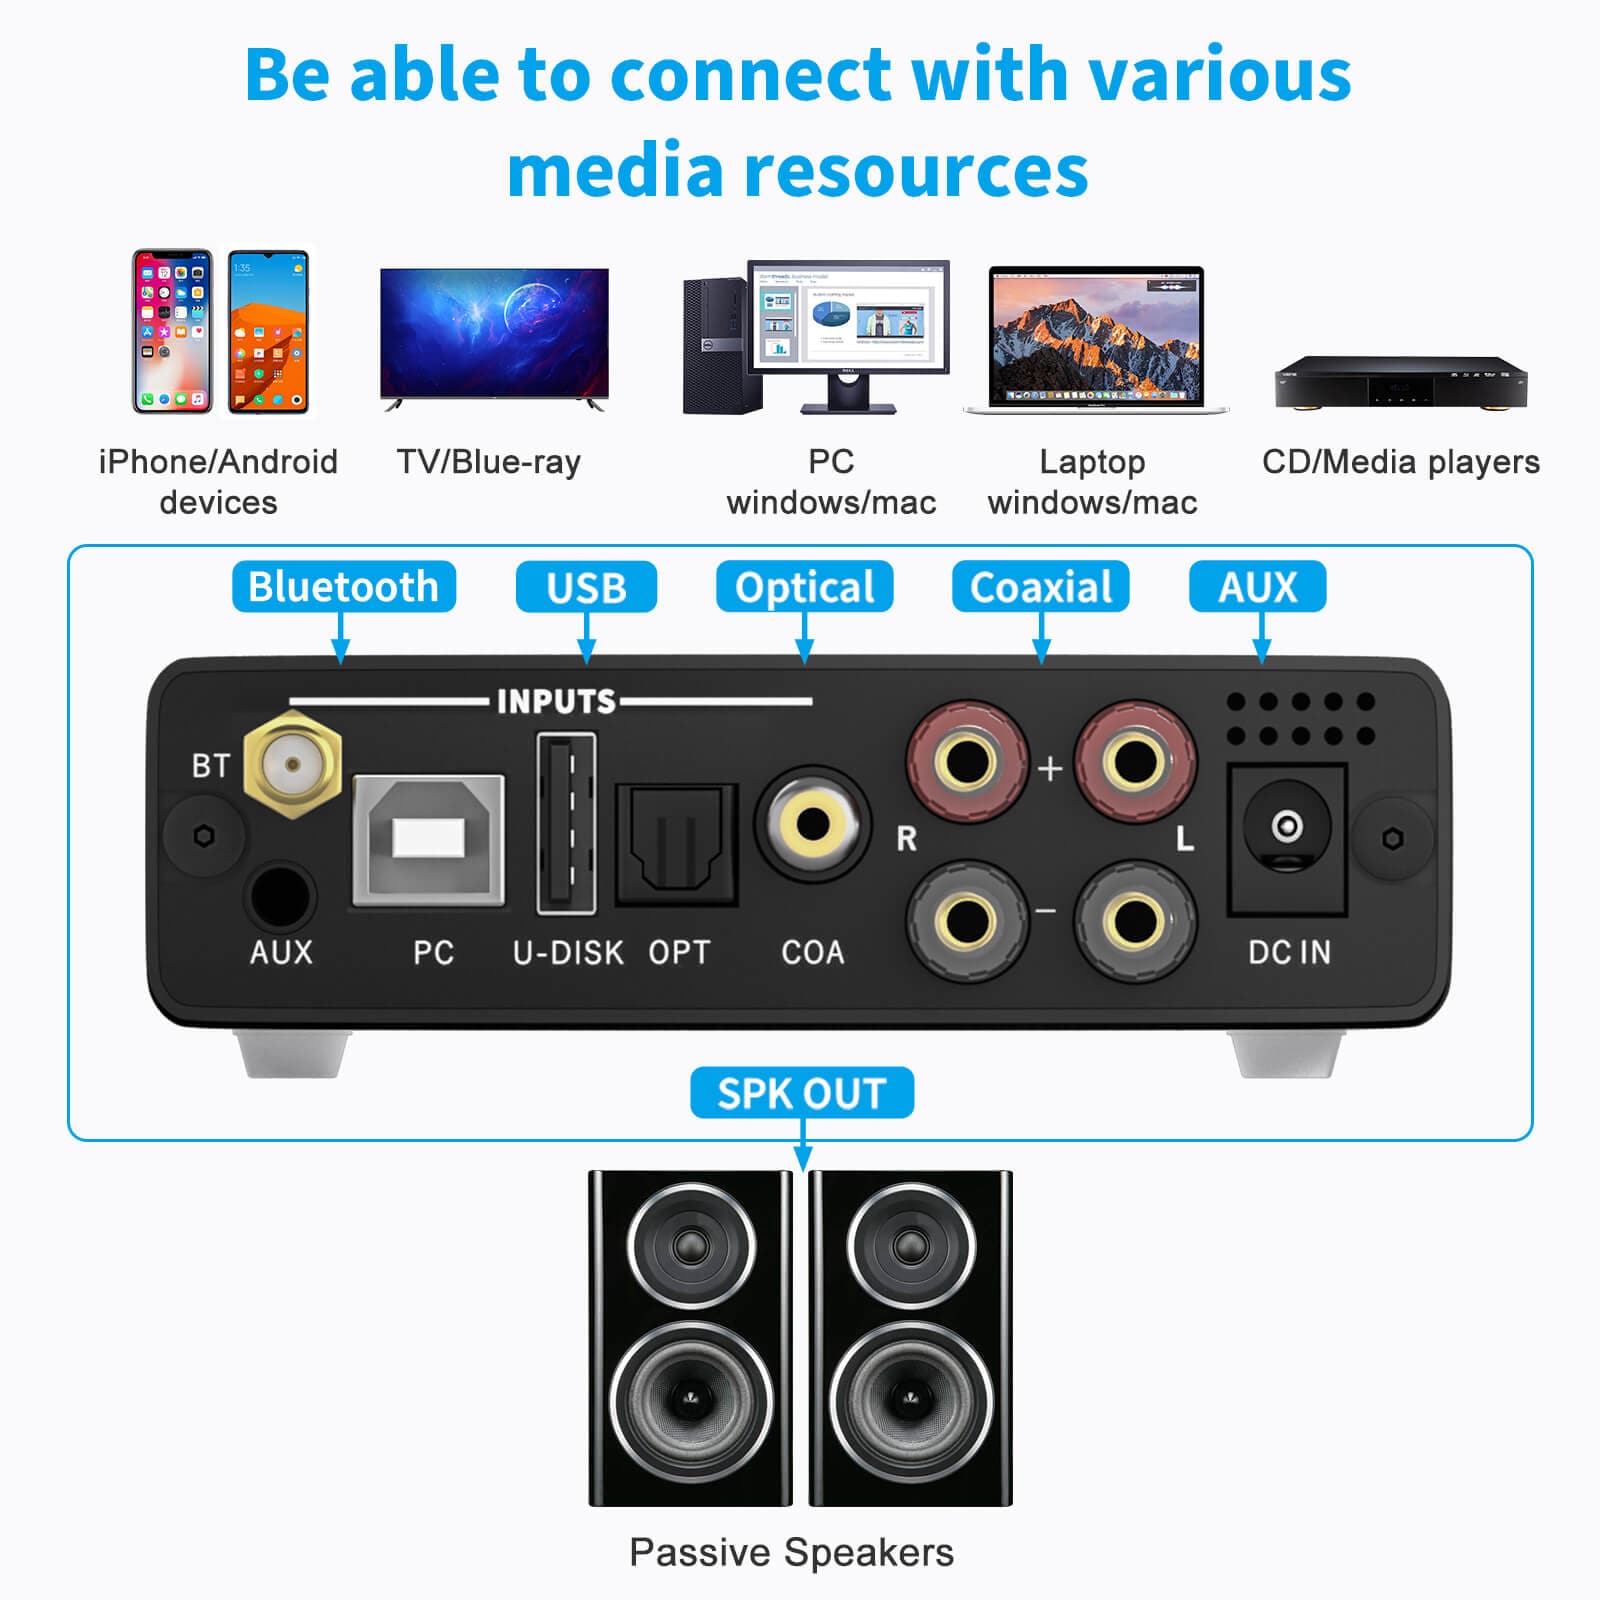 DA2120B Bluetooth Amplifier be able to connect with various media resources